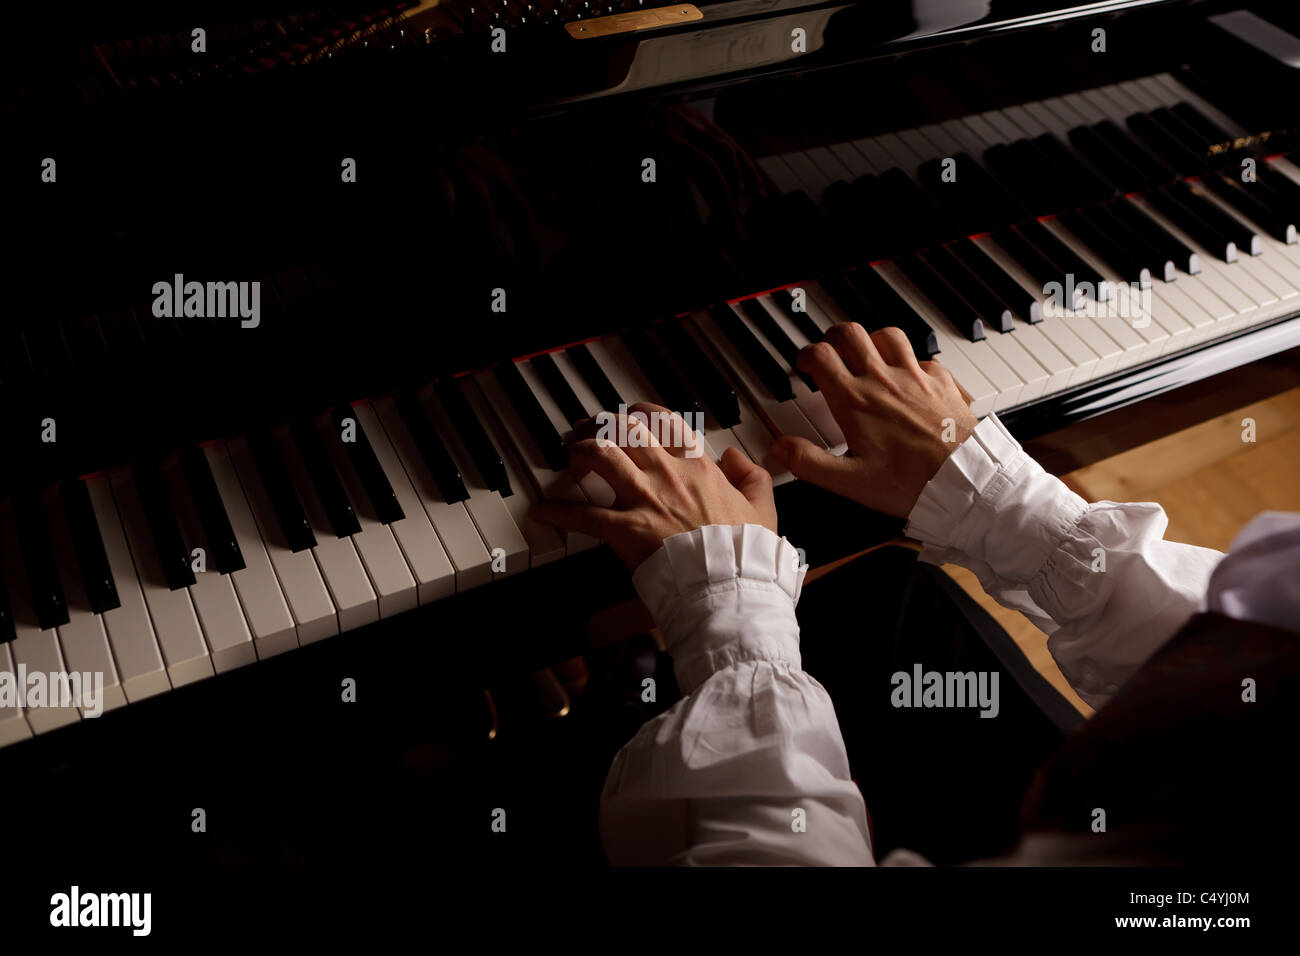 Concert pianist's hands and keyboard Stock Photo